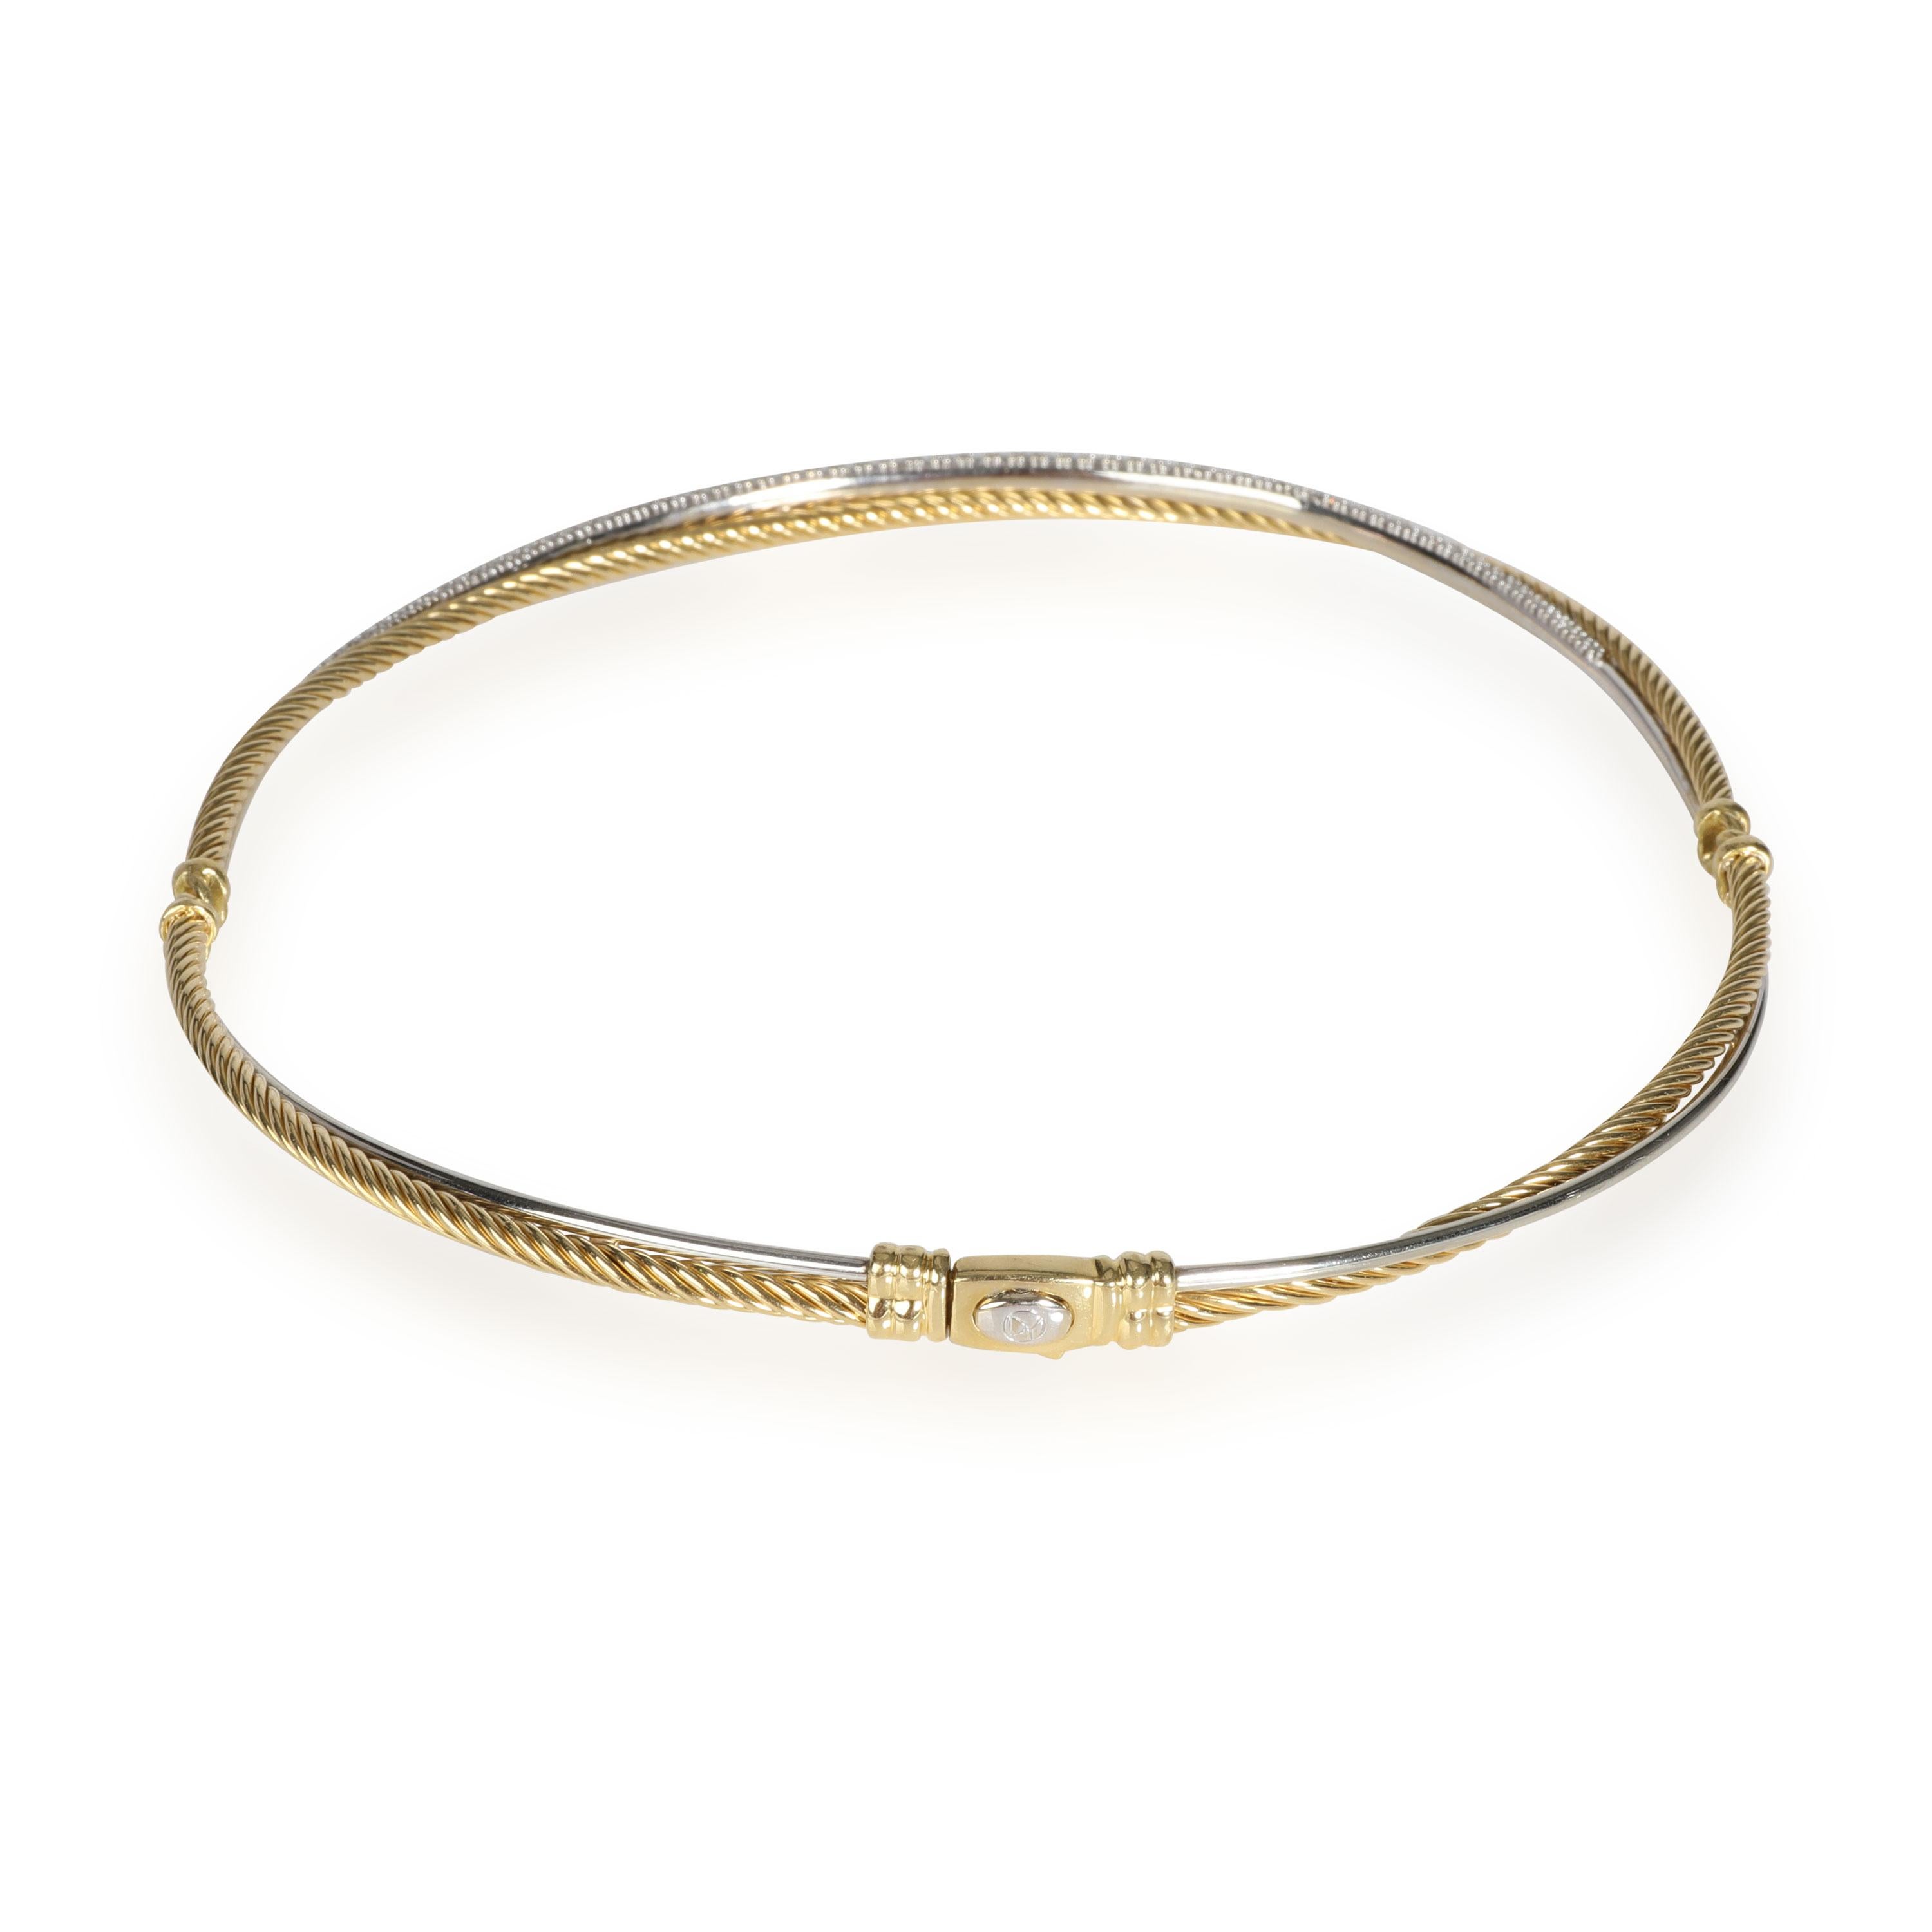 David Yurman Crossover Diamond Choker Necklace in 18K 2 Tone Gold 0.60 CTW

PRIMARY DETAILS
SKU: 111319
Listing Title: David Yurman Crossover Diamond Choker Necklace in 18K 2 Tone Gold 0.60 CTW
Condition Description: Retails for 10500 USD. In